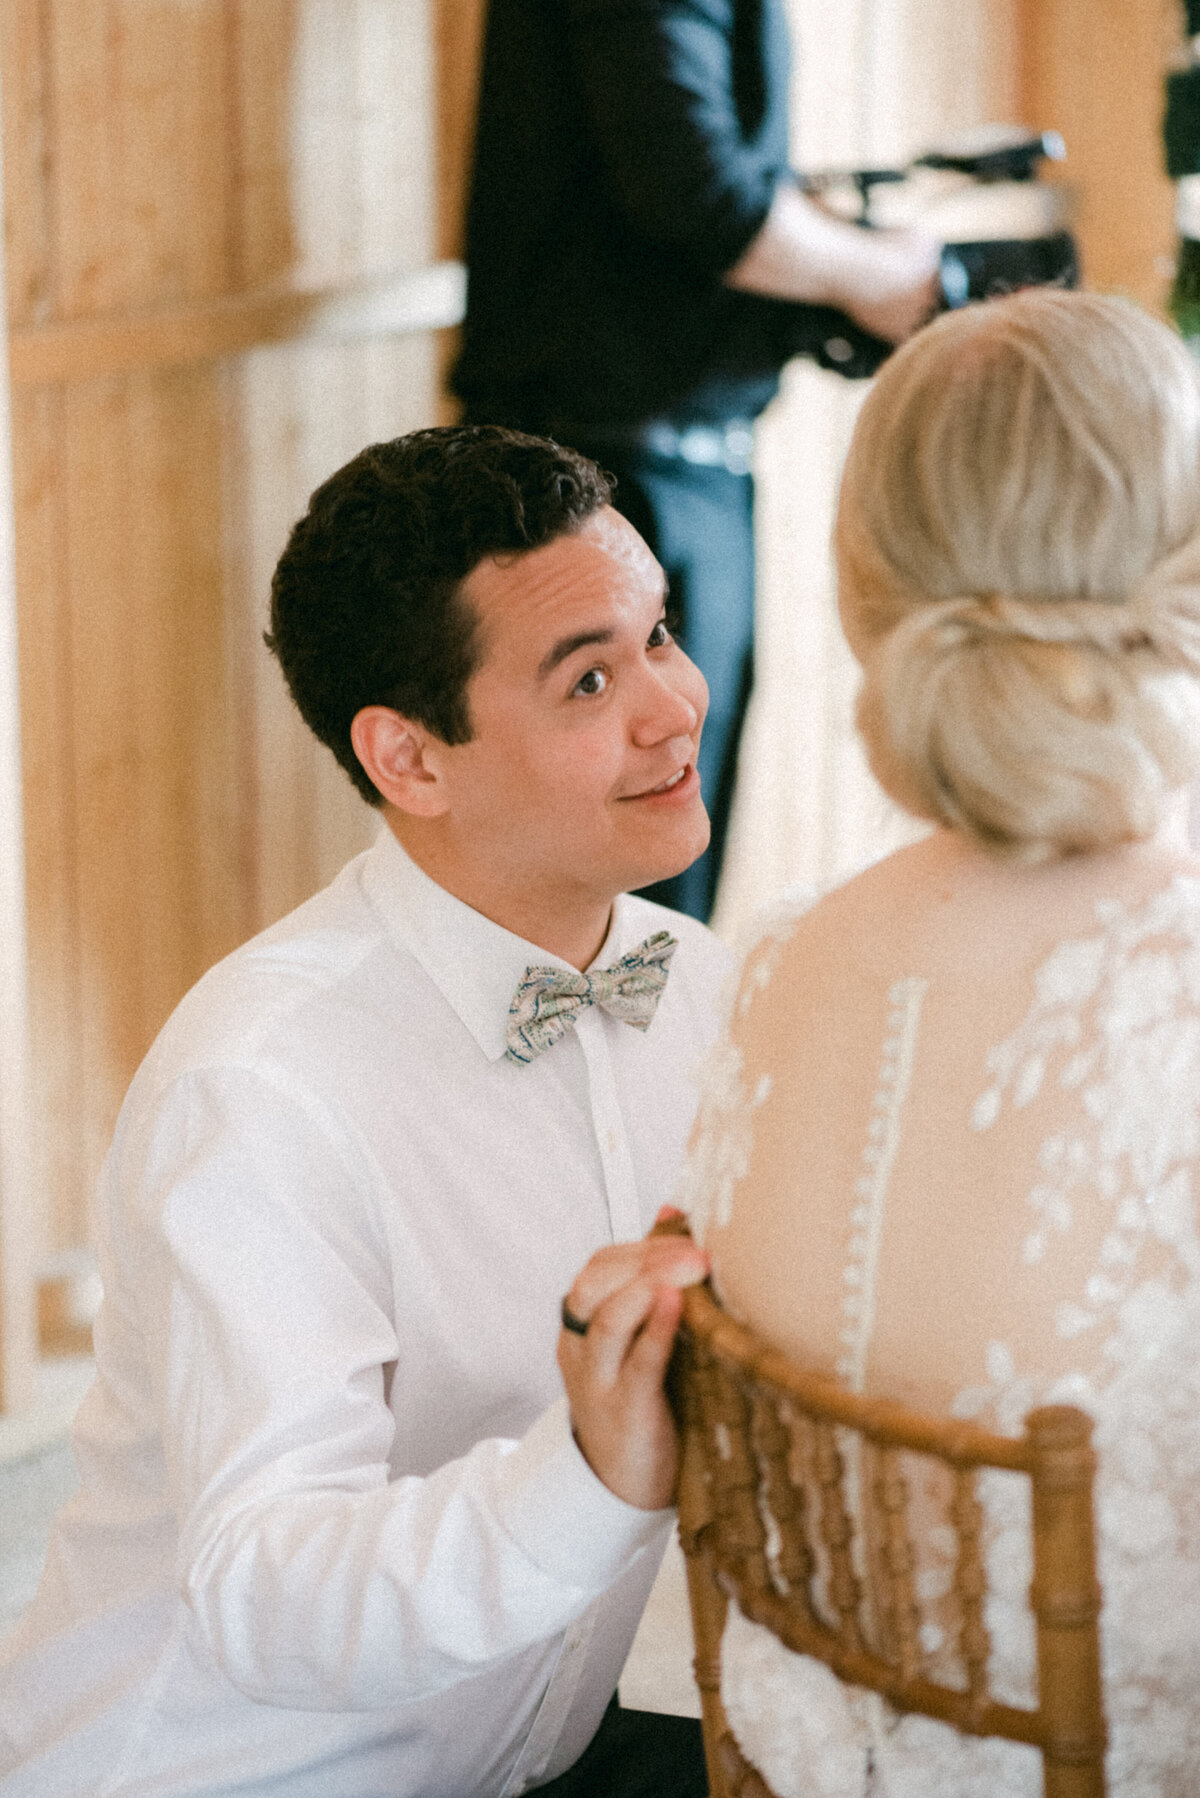 A guest talking with the bride in the wedding in an image captured by wedding photographer Hannika Gabrielsson.